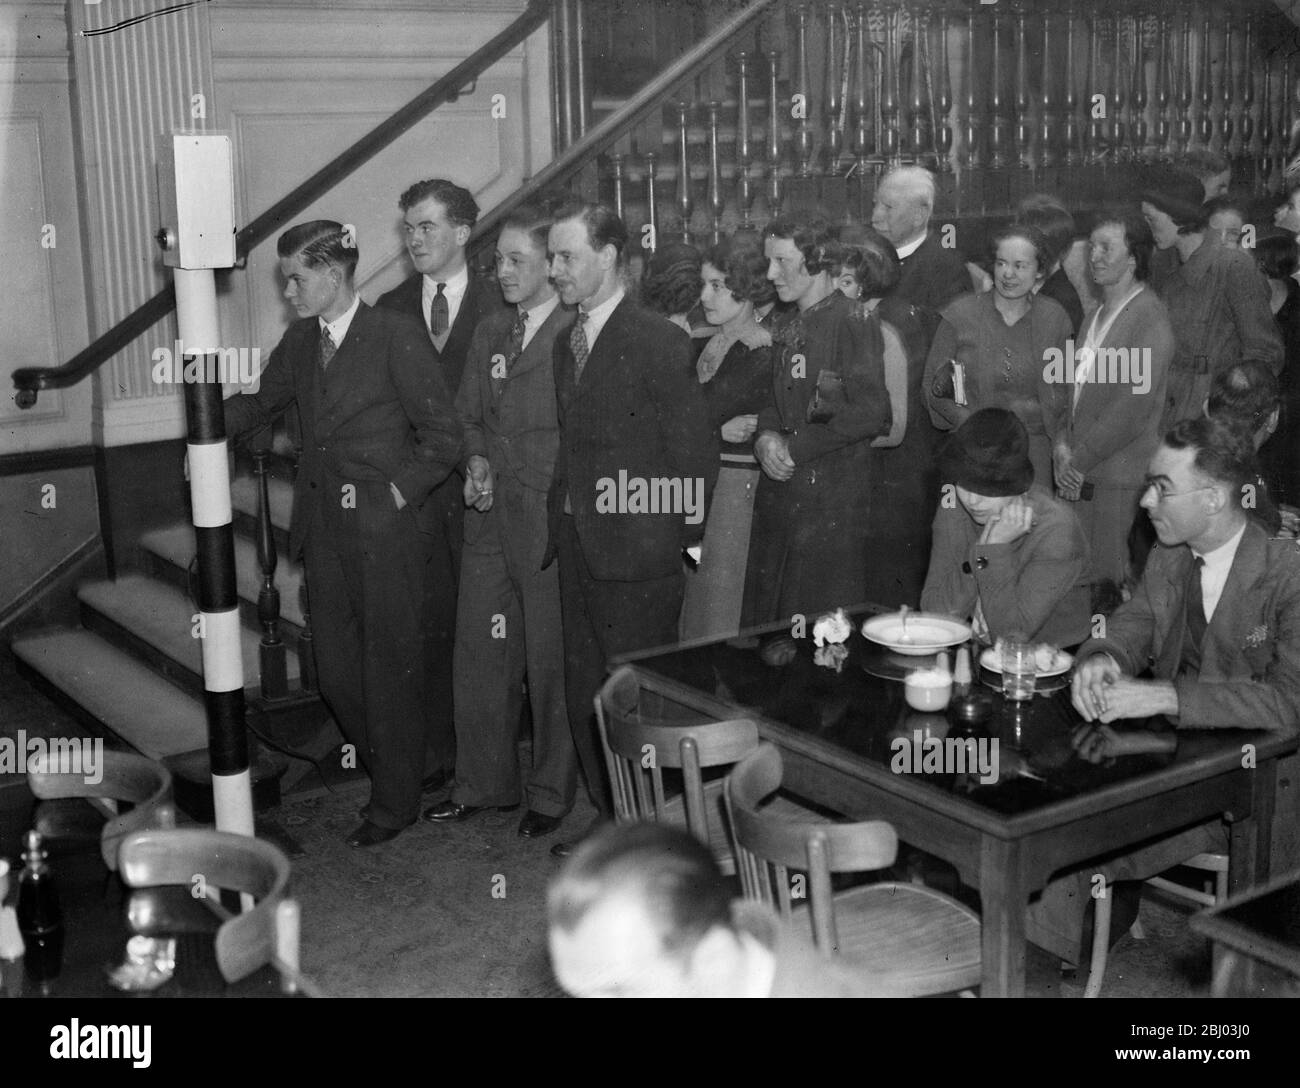 Traffic lights control diners . Lunch hour crowds at Millbank restaurant eat to ' Stop ' and ' Go ' signals . - 29 January 1935 Stock Photo